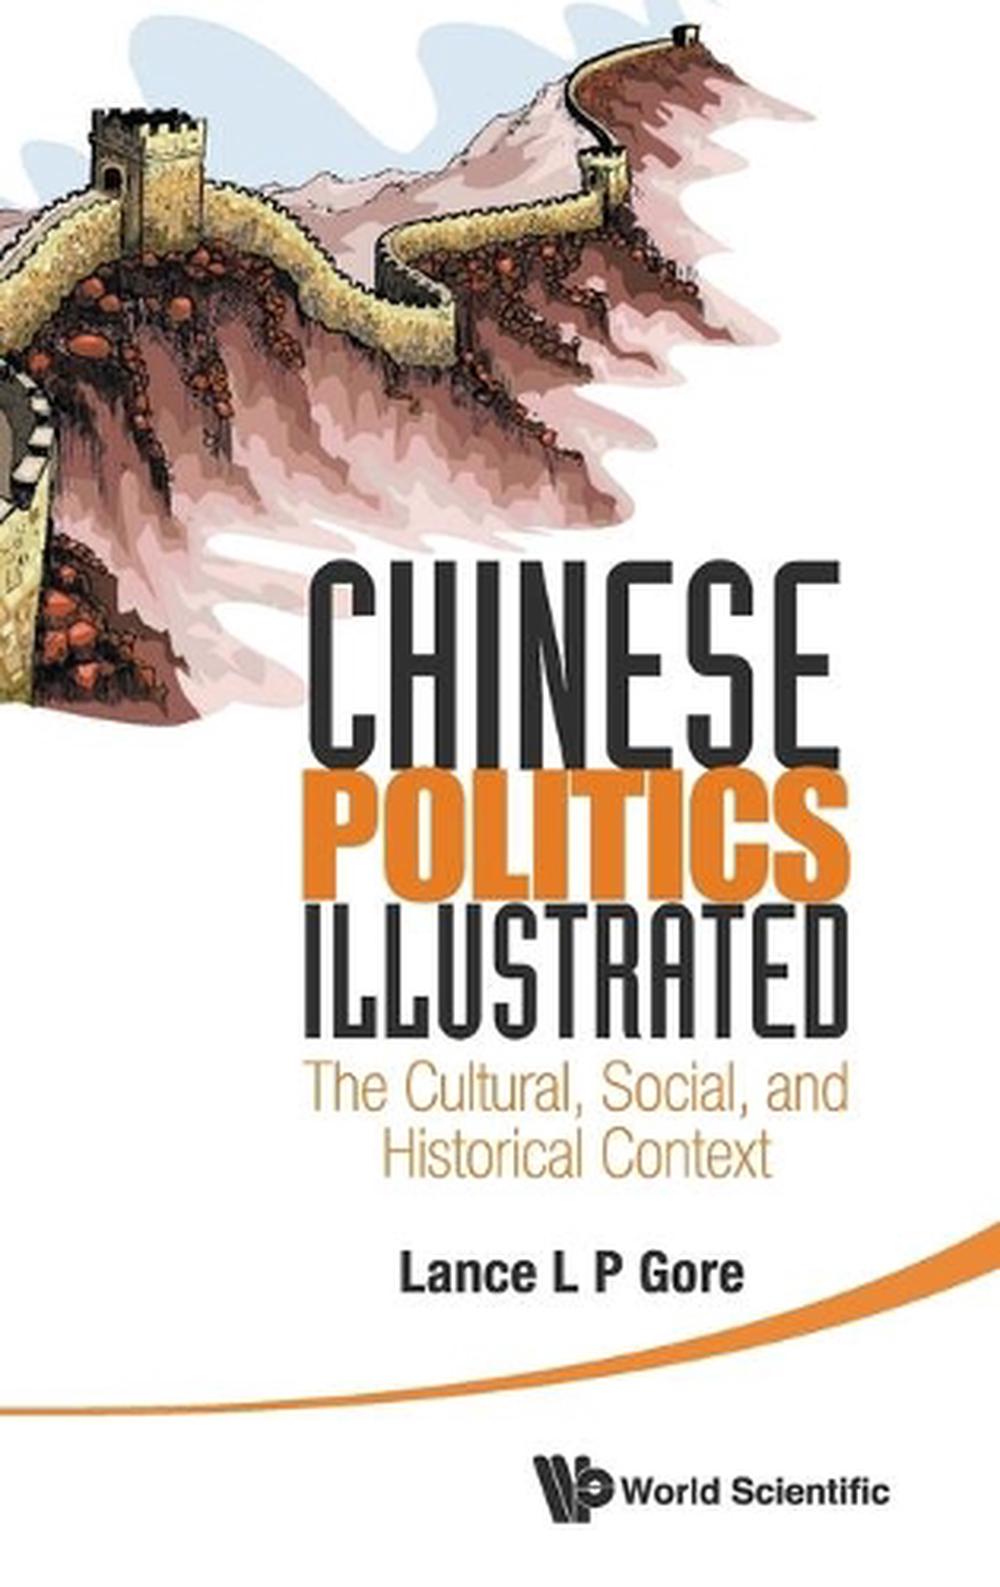 Chinese Politics Illustrated The Cultural, Social, and Historical